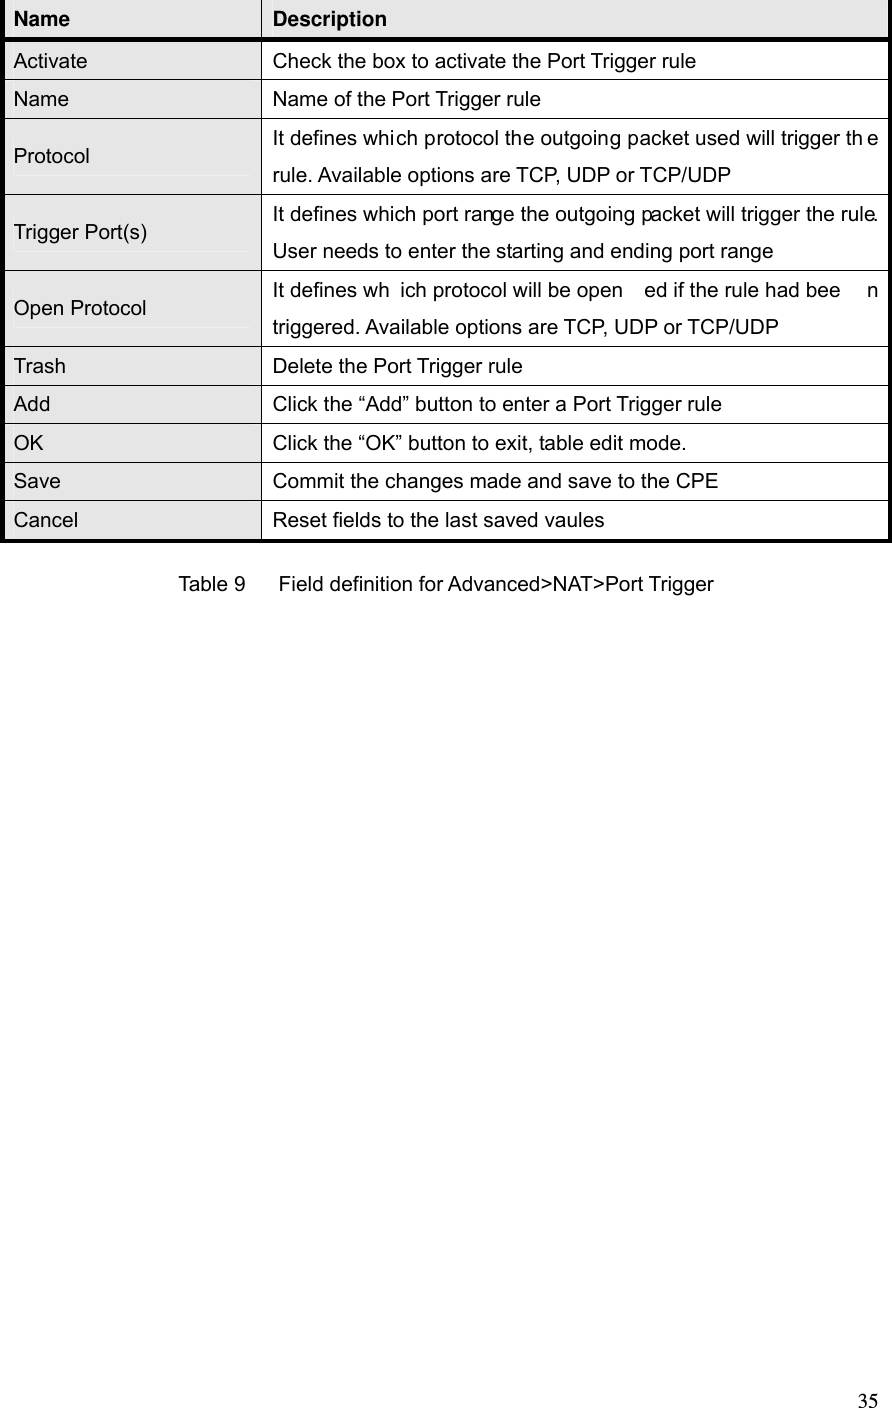  35 Name  Description Activate  Check the box to activate the Port Trigger rule Name  Name of the Port Trigger rule Protocol  It defines which protocol the outgoing packet used will trigger th e rule. Available options are TCP, UDP or TCP/UDP Trigger Port(s)  It defines which port range the outgoing packet will trigger the rule. User needs to enter the starting and ending port range Open Protocol  It defines wh ich protocol will be open ed if the rule had bee n triggered. Available options are TCP, UDP or TCP/UDP Trash  Delete the Port Trigger rule Add  Click the “Add” button to enter a Port Trigger rule OK  Click the “OK” button to exit, table edit mode. Save  Commit the changes made and save to the CPE Cancel  Reset fields to the last saved vaules Table 9  Field definition for Advanced&gt;NAT&gt;Port Trigger 